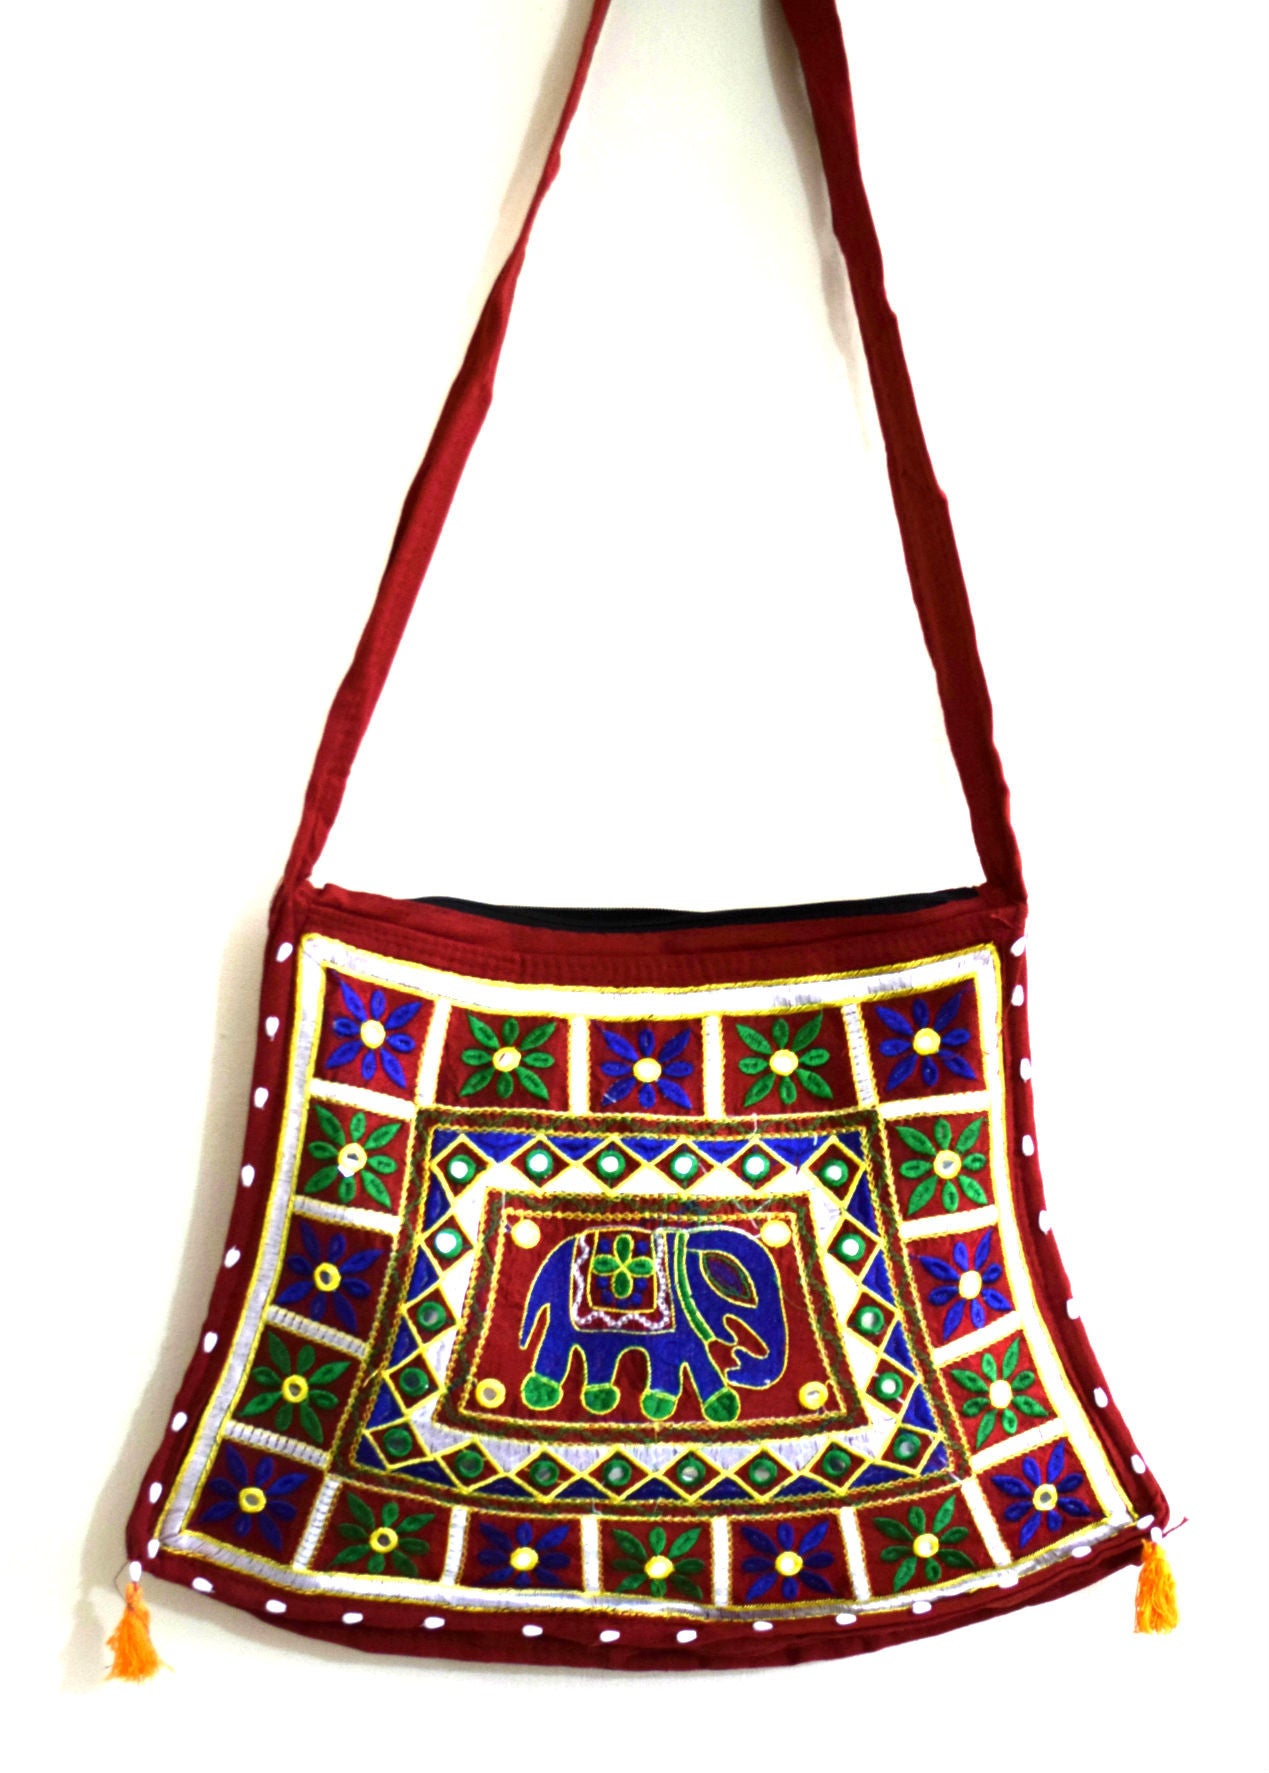 Buy Peacock Bag, Peacock Art, Rajasthani Bag, Embroidered Bag, Indian Bag,  Handmade Bag, Bags for Women, Boho Bag, Womens Gifts, Gifts for Her Online  in India - Etsy